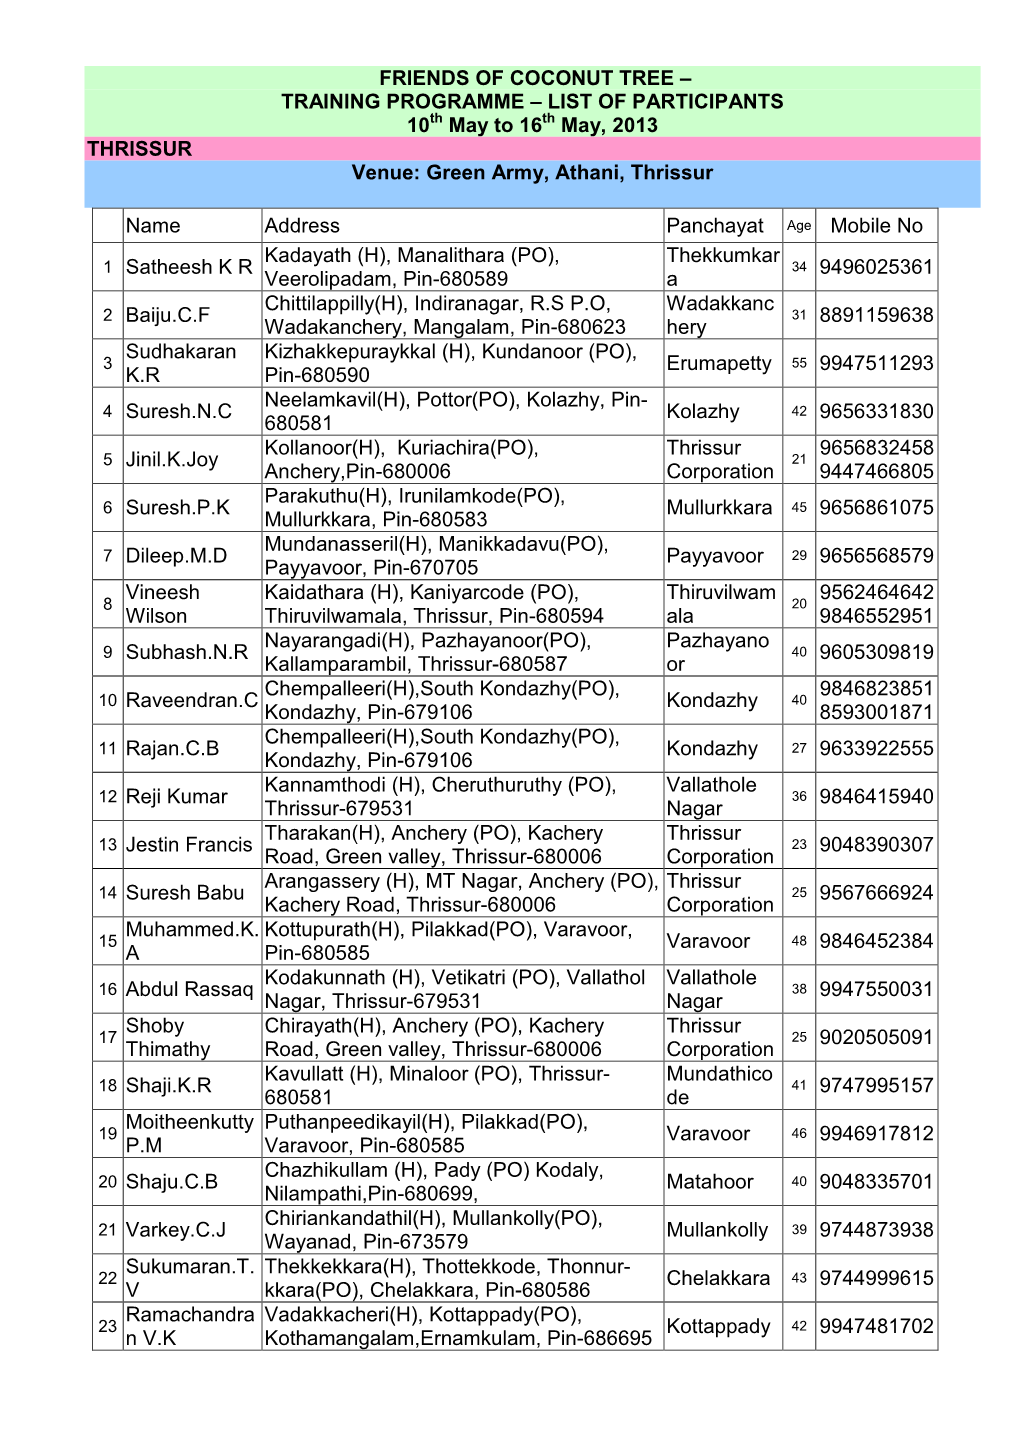 FRIENDS of COCONUT TREE – TRAINING PROGRAMME – LIST of PARTICIPANTS 10 Th May to 16 Th May, 2013 THRISSUR Venue: Green Army, Athani, Thrissur